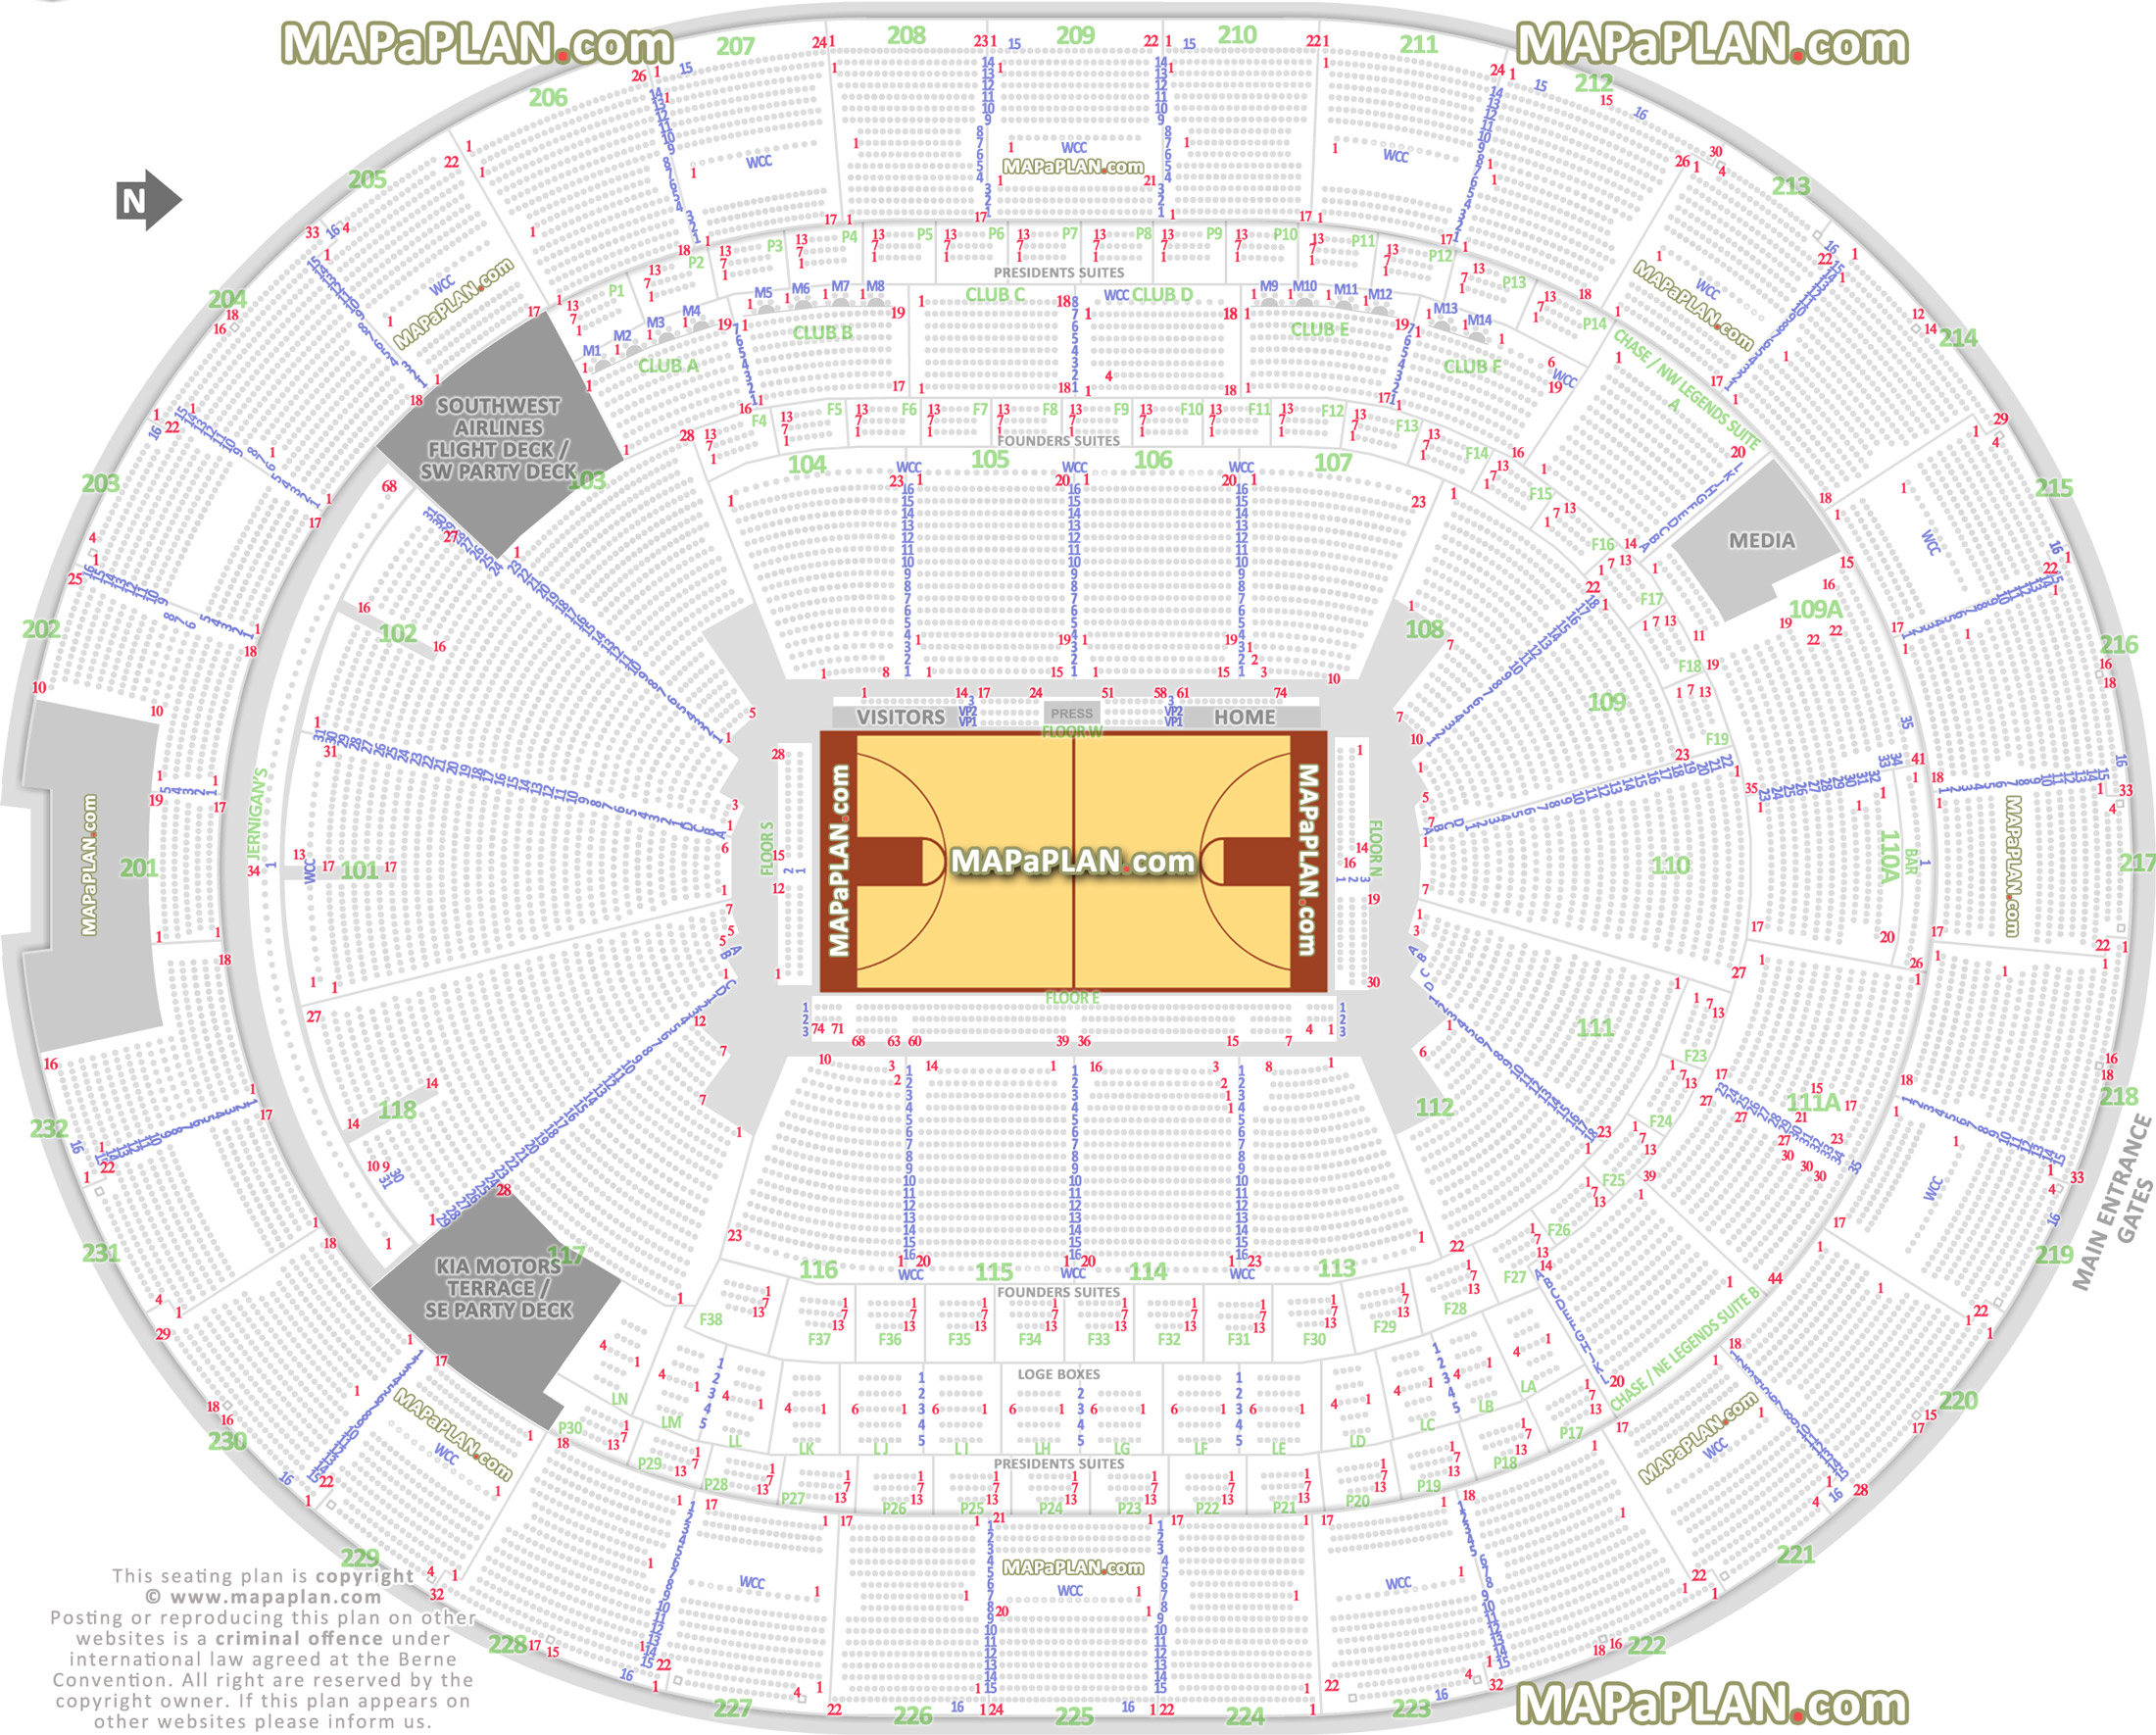 orlando magic stadium nba basketball game court exact venue map individual find seat locator courtside home side area bench superstar ultimate Orlando Amway Center seating chart